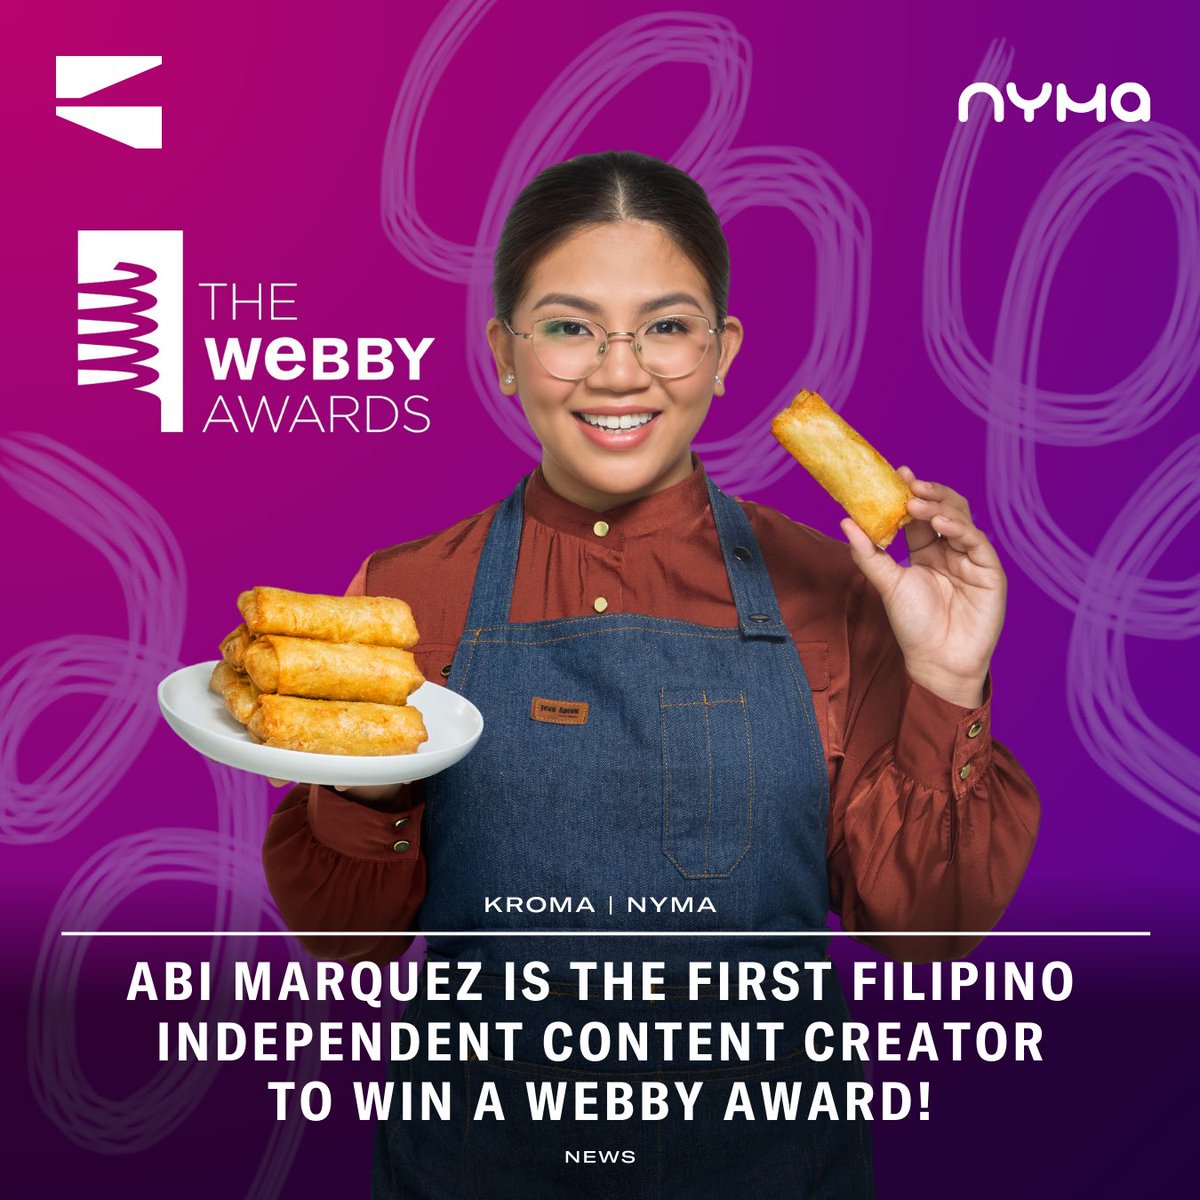 The Lumpia Queen is now also a Webby Award winner! 🥳 Abi Marquez continues to stir up the culinary world as she becomes a Webby People’s Voice Winner in the Social - Food & Drink category at the 28th Annual Webby Awards! She's the first Filipino independent content creator to